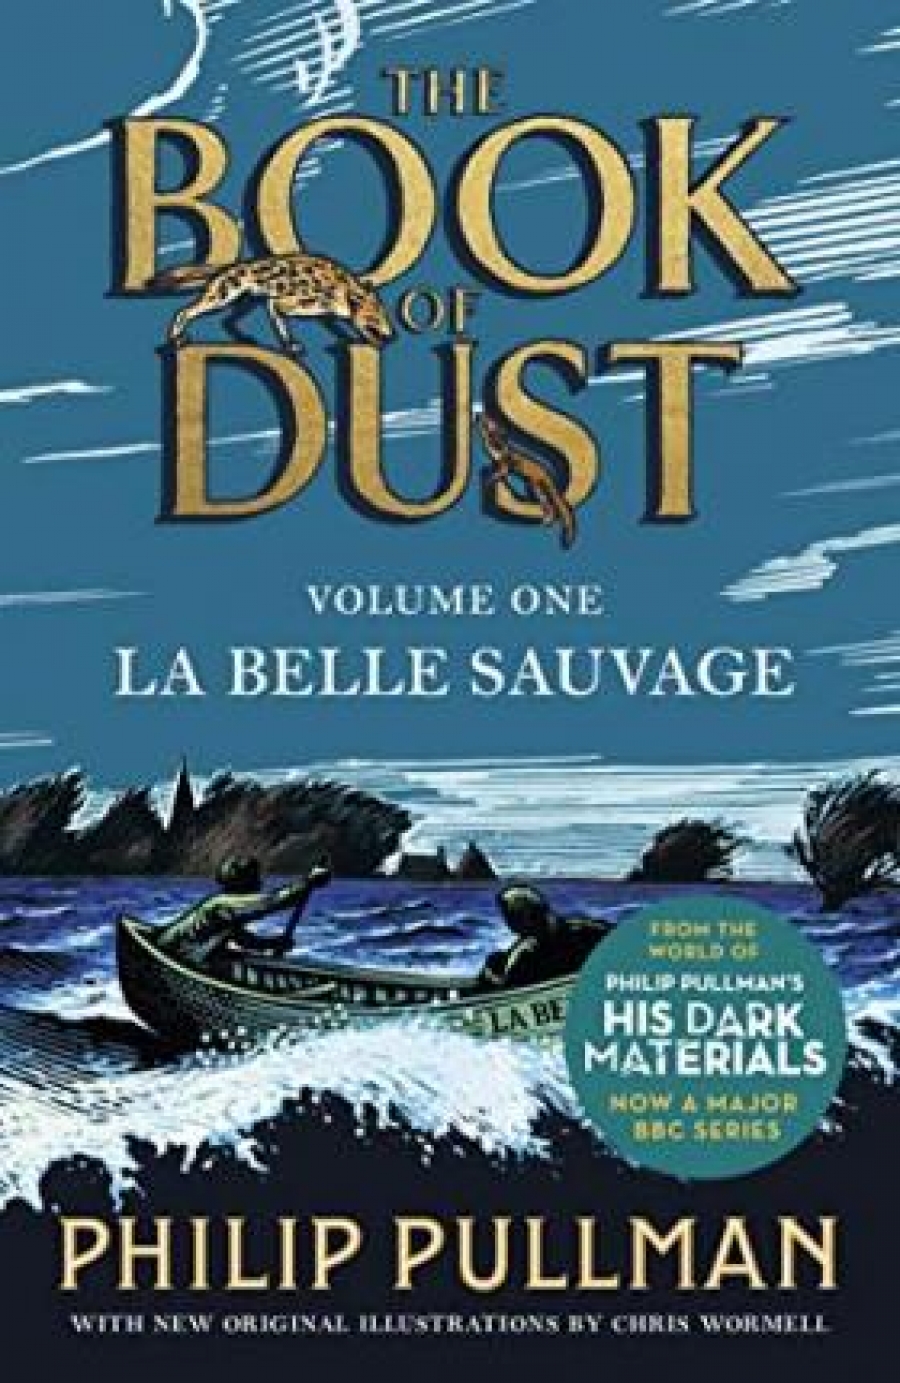 Pullman Philip La Belle Sauvage: The Book of Dust. Volume One 